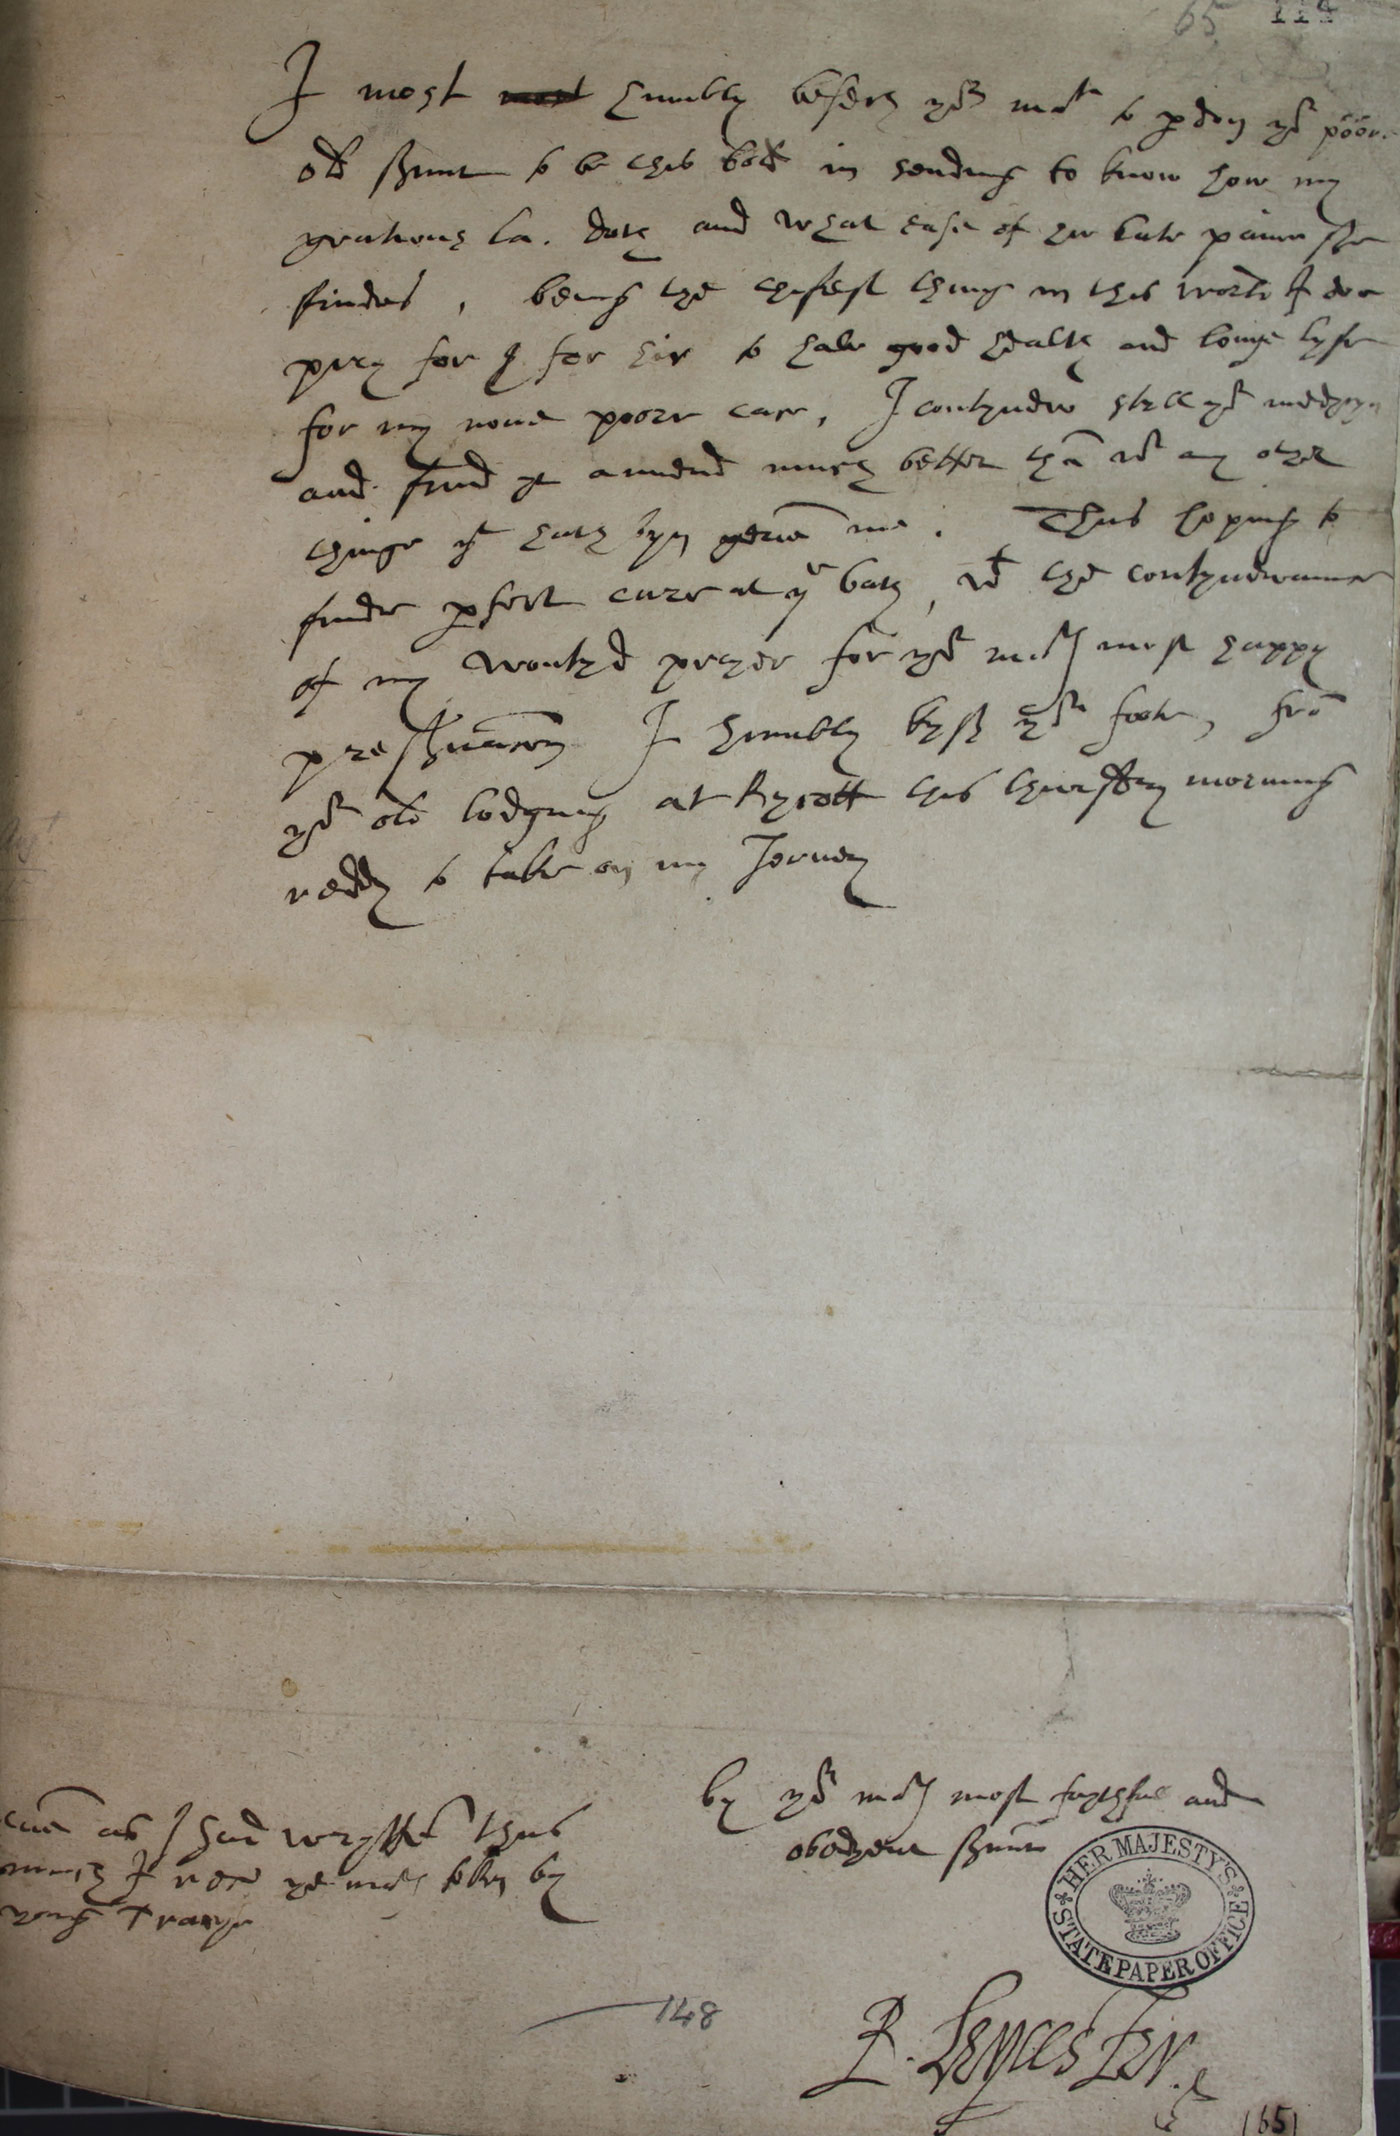 Robert Dudley, Earl of Leicester to Elizabeth, 29 August 1588 (SP 12/215 f.114)